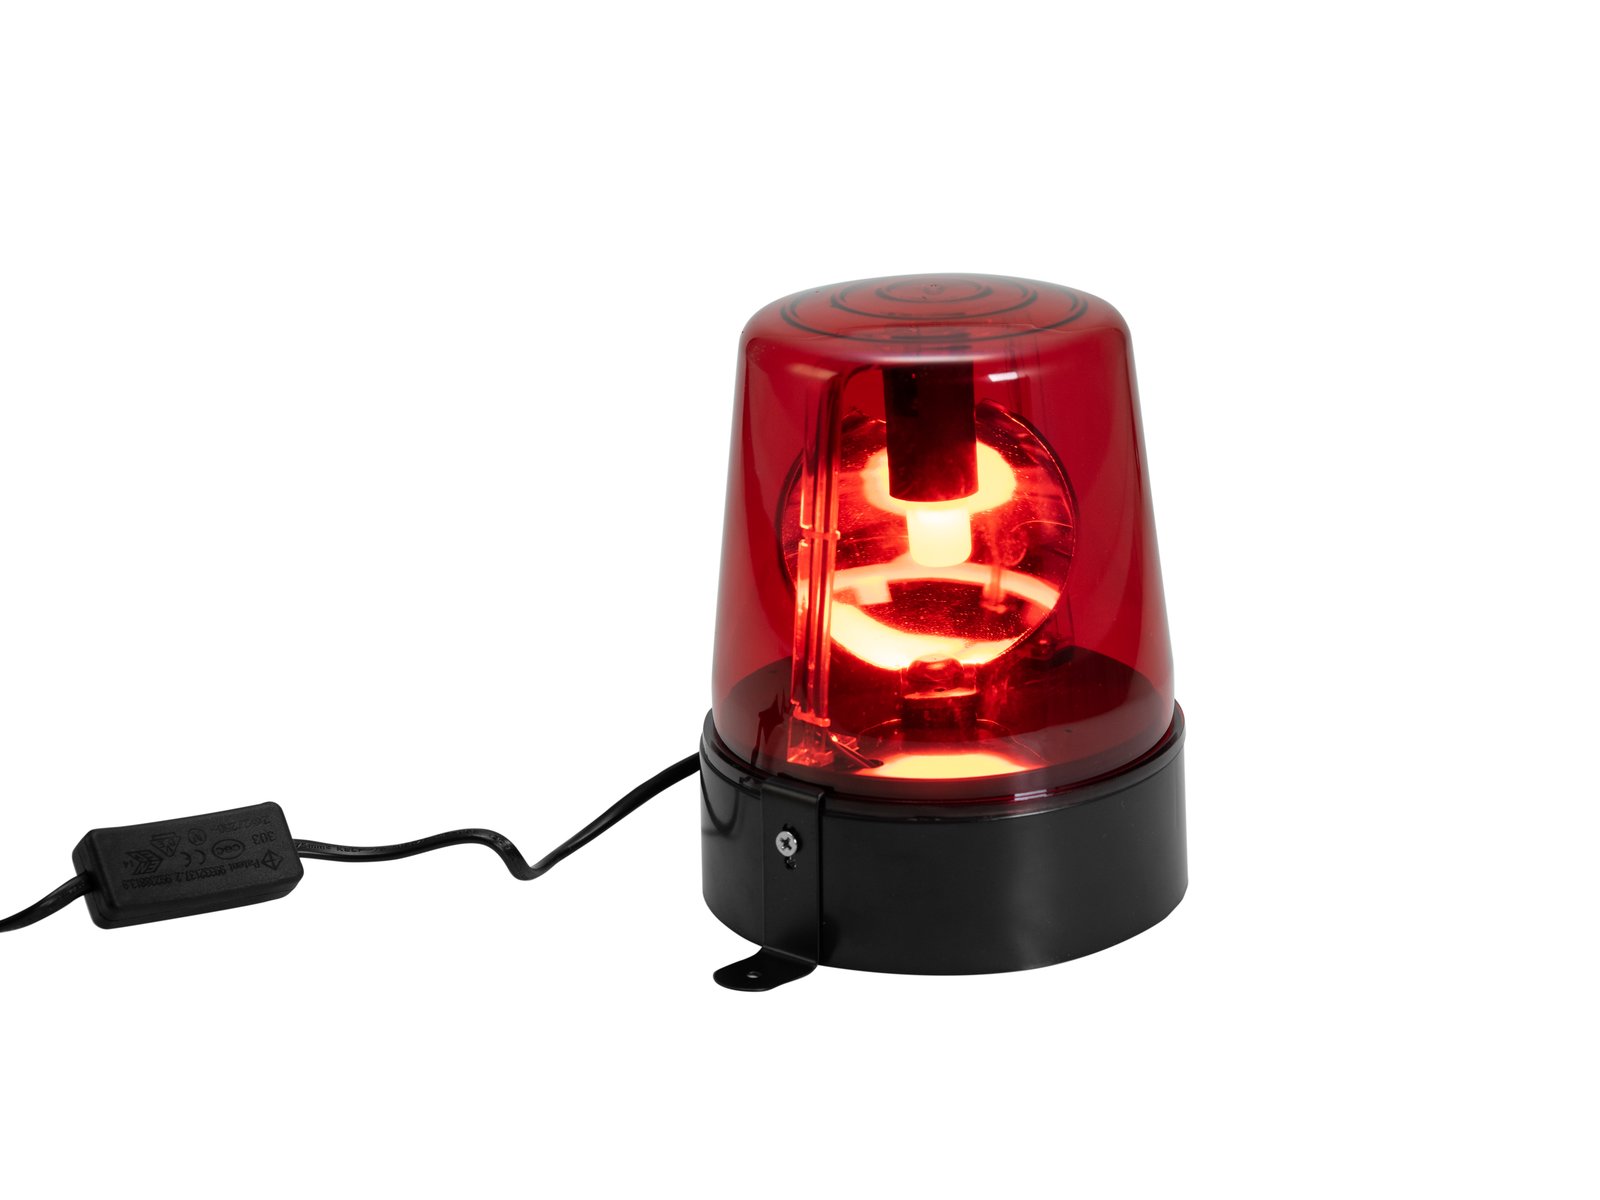 Gyrophare Rouge 230 volts